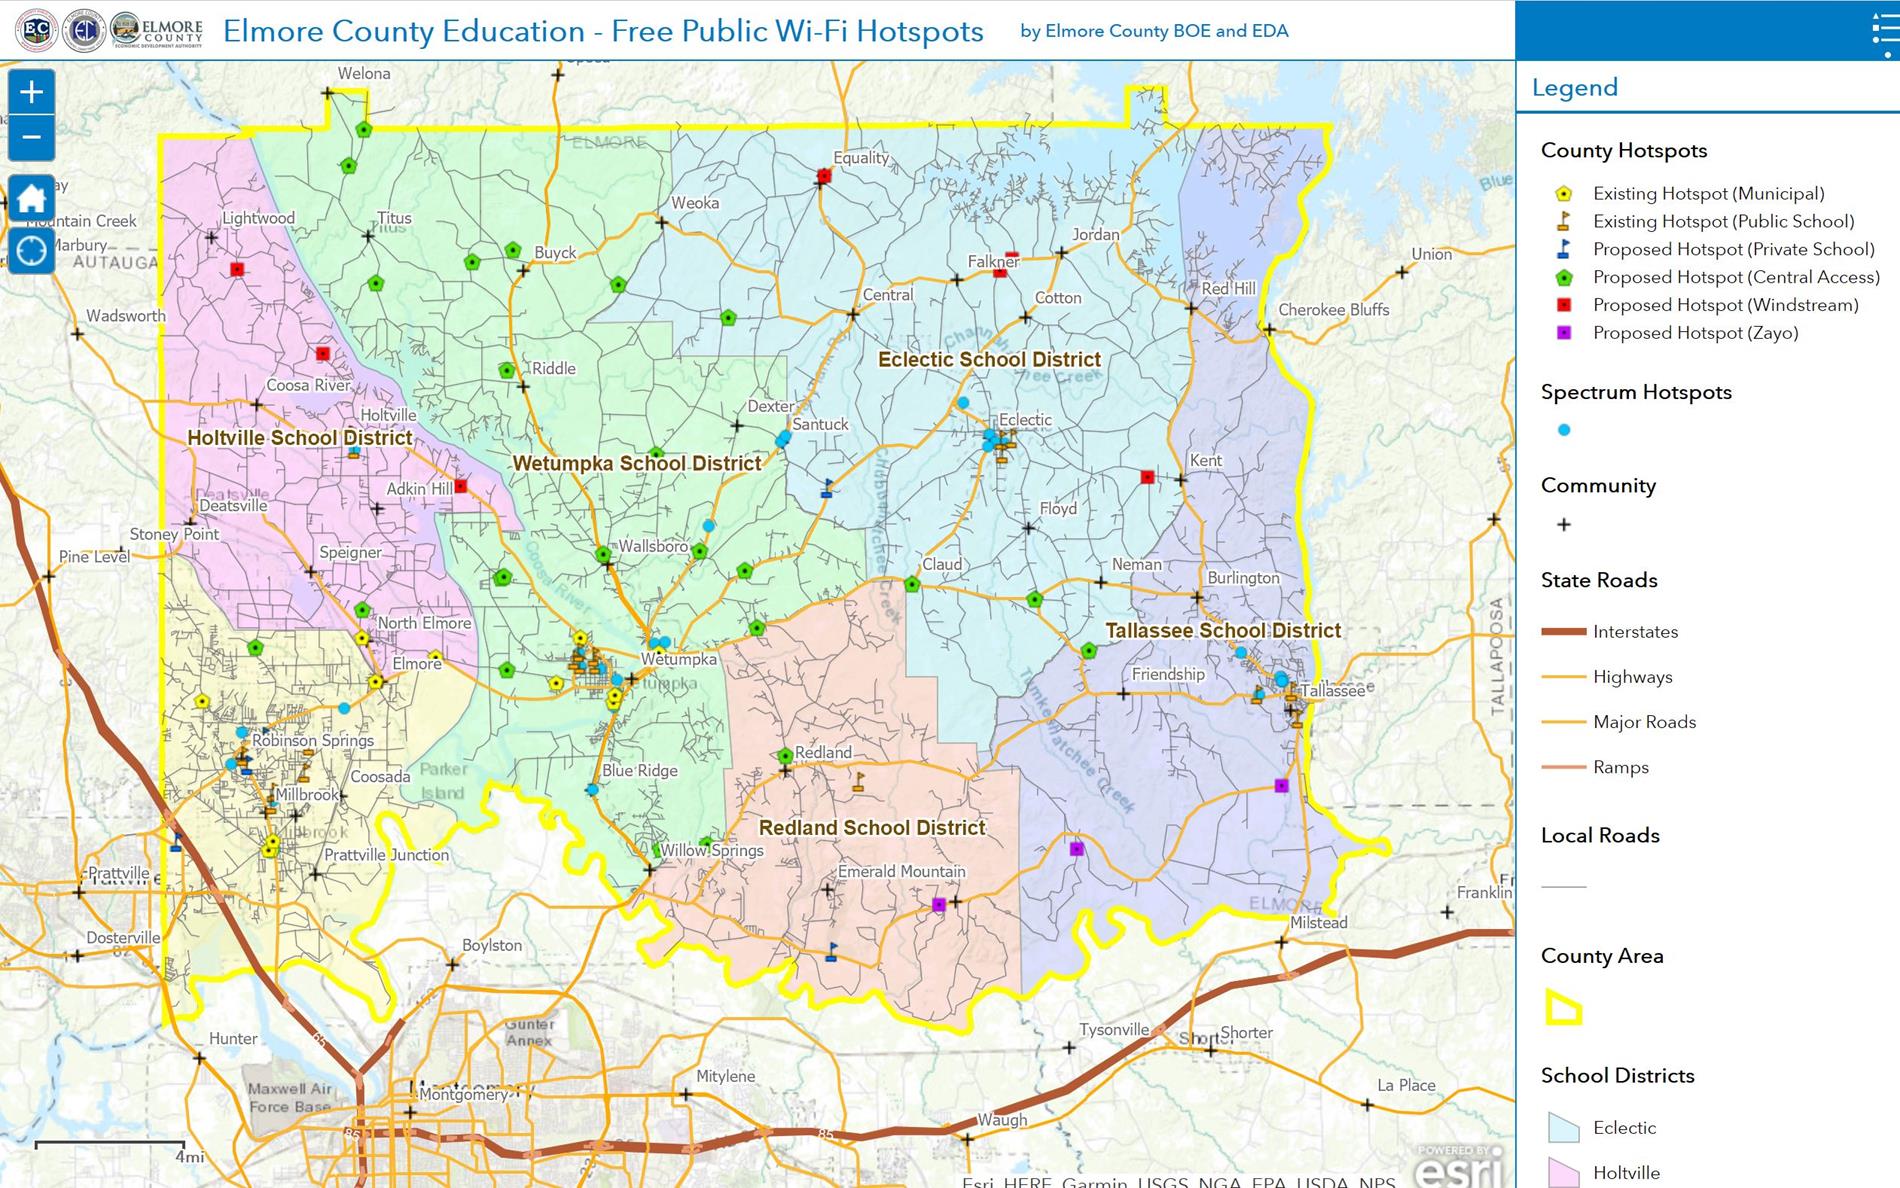 Click for Interactive Map of Free Public Wi-Fi Hotspots